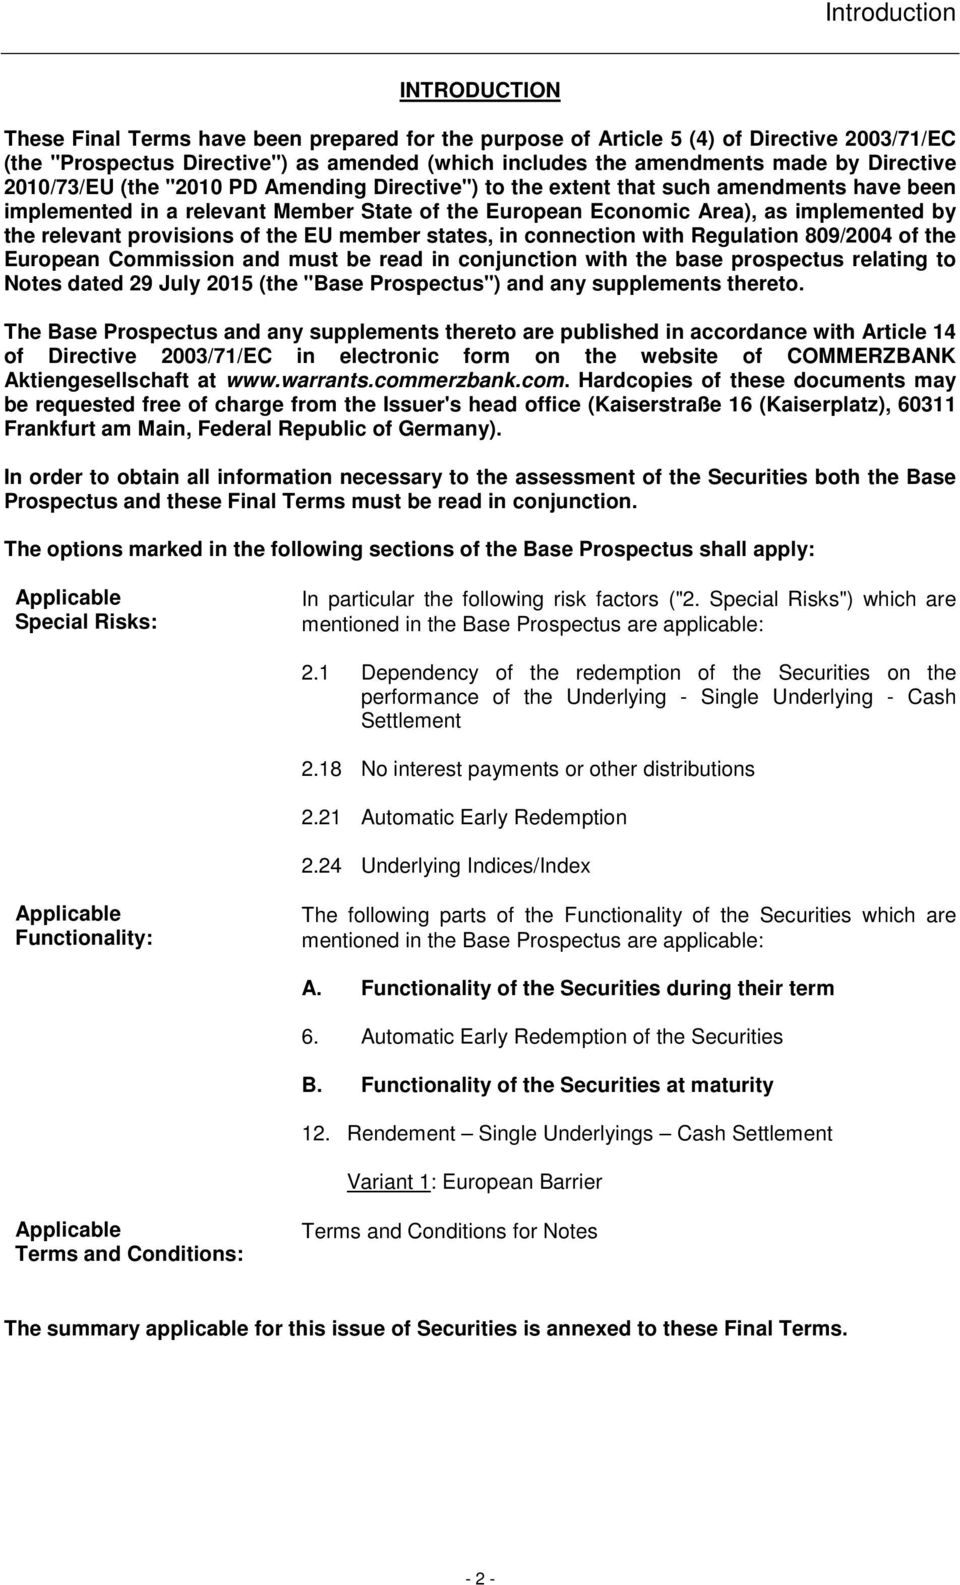 relevant provisions of the EU member states, in connection with Regulation 809/2004 of the European Commission and must be read in conjunction with the base prospectus relating to Notes dated 29 July